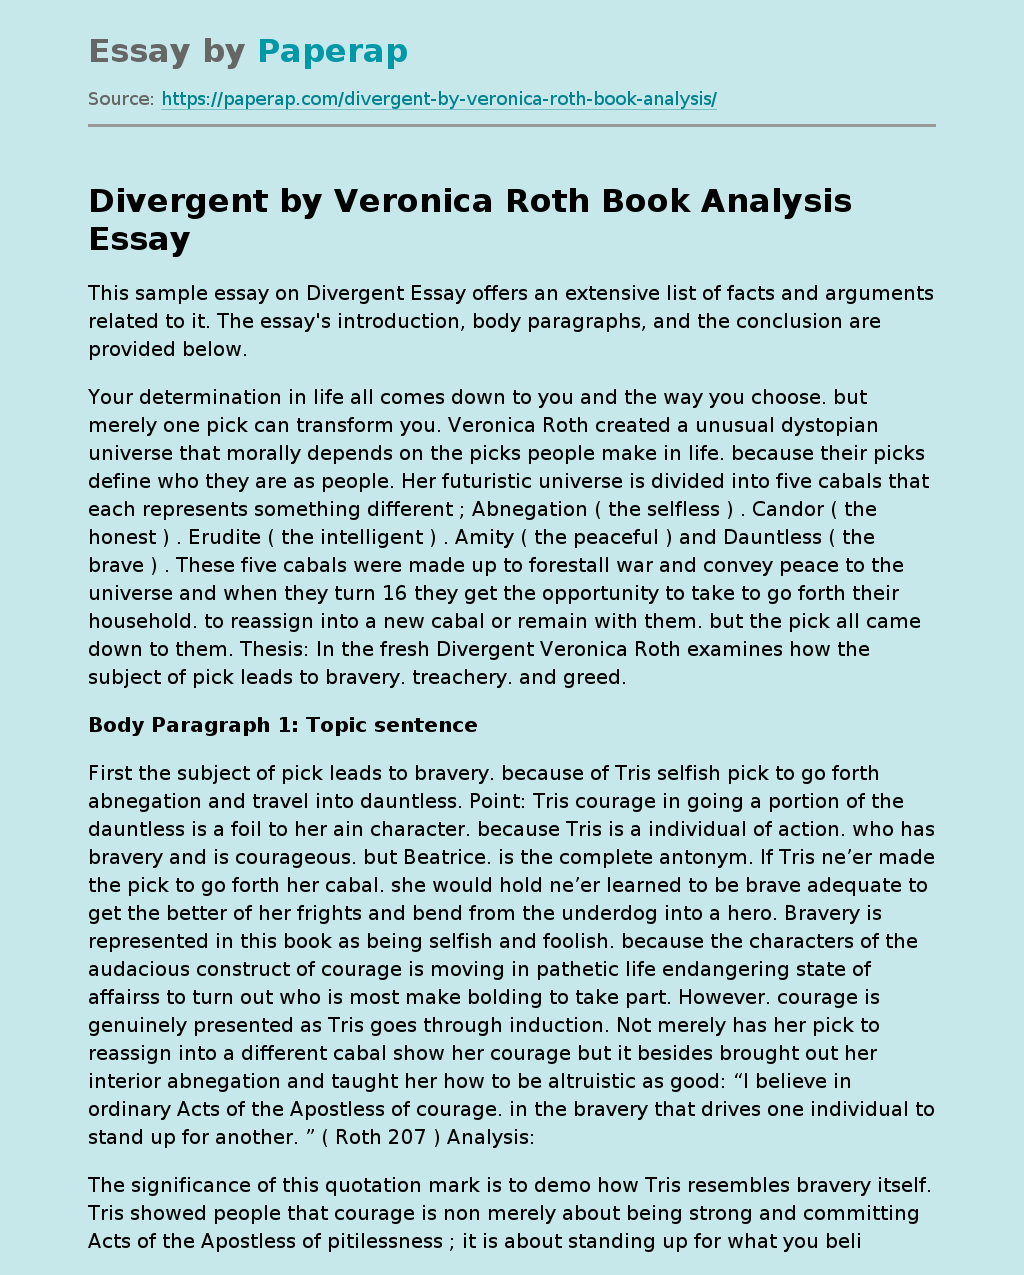 book review company of divergent essay